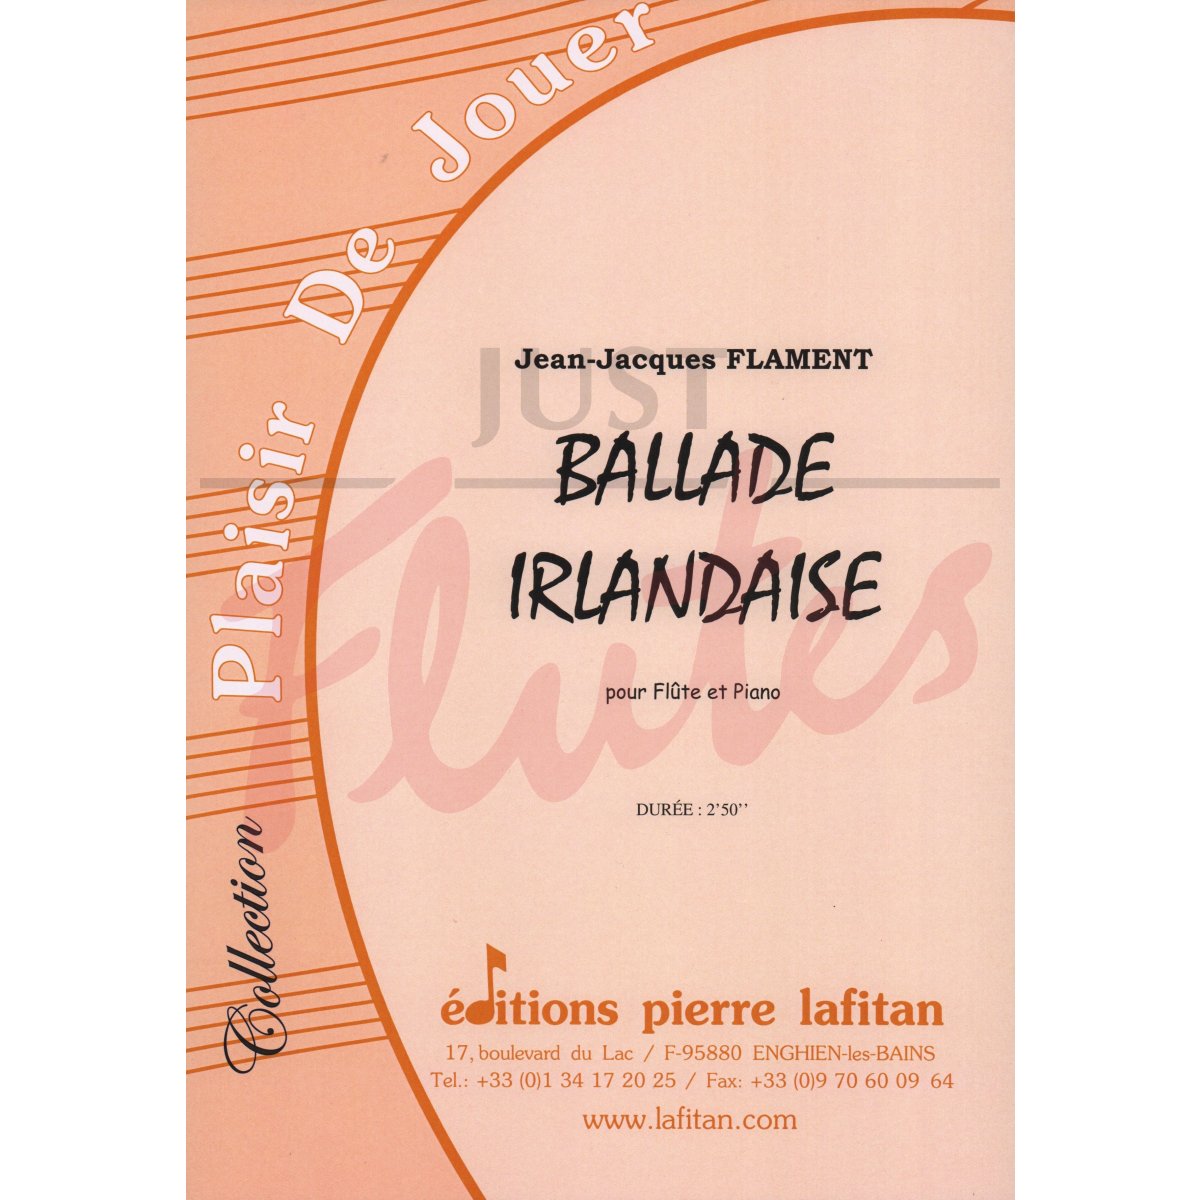 Ballade Irlandaise for Flute and Piano